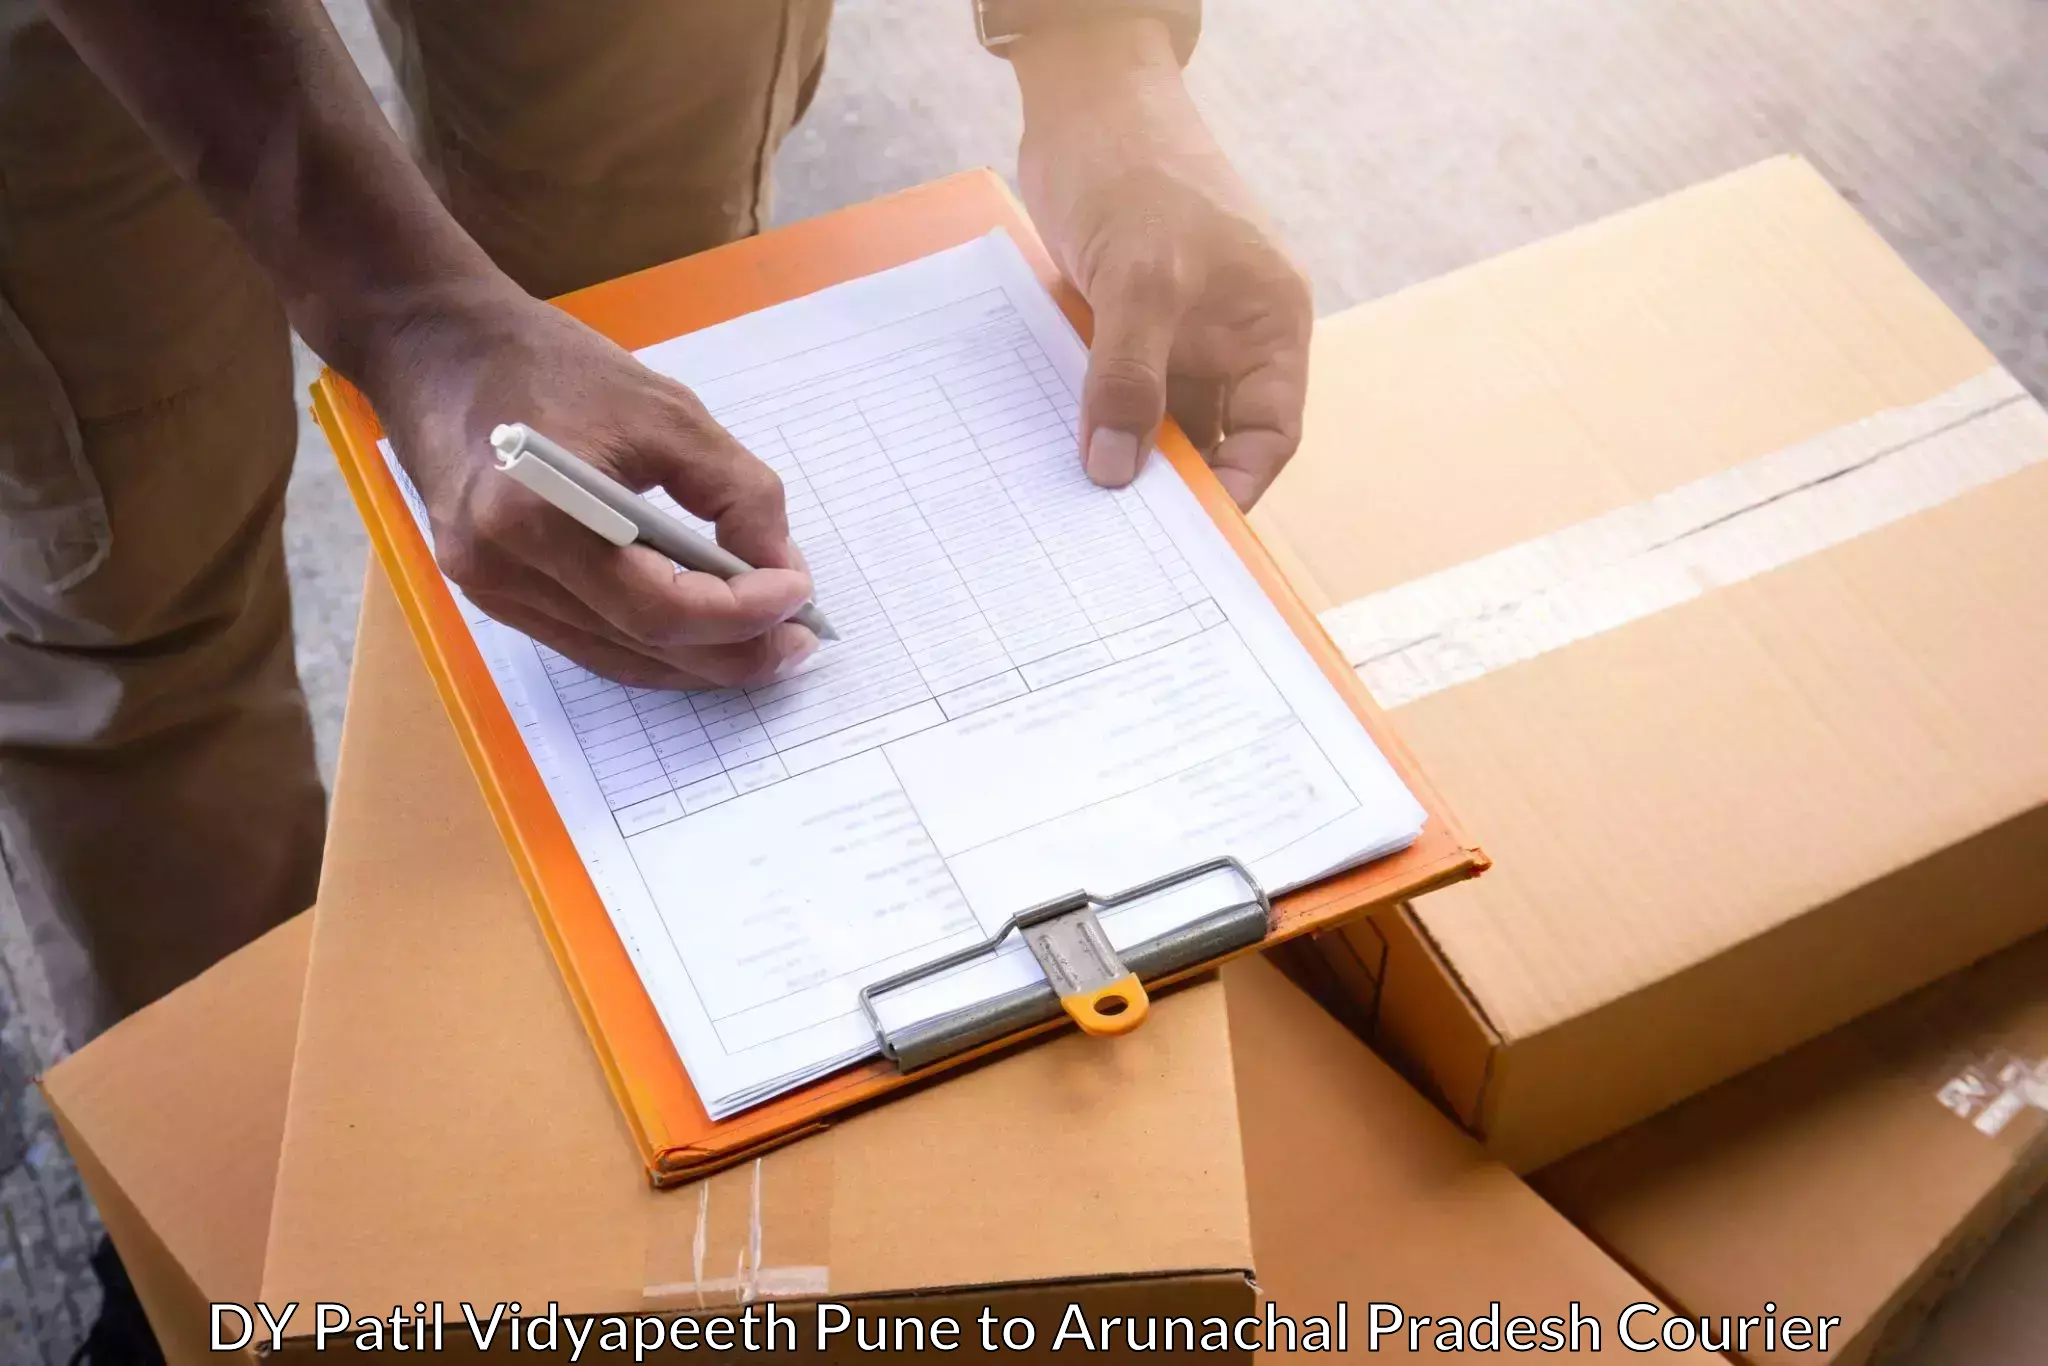 High value parcel delivery in DY Patil Vidyapeeth Pune to Nirjuli